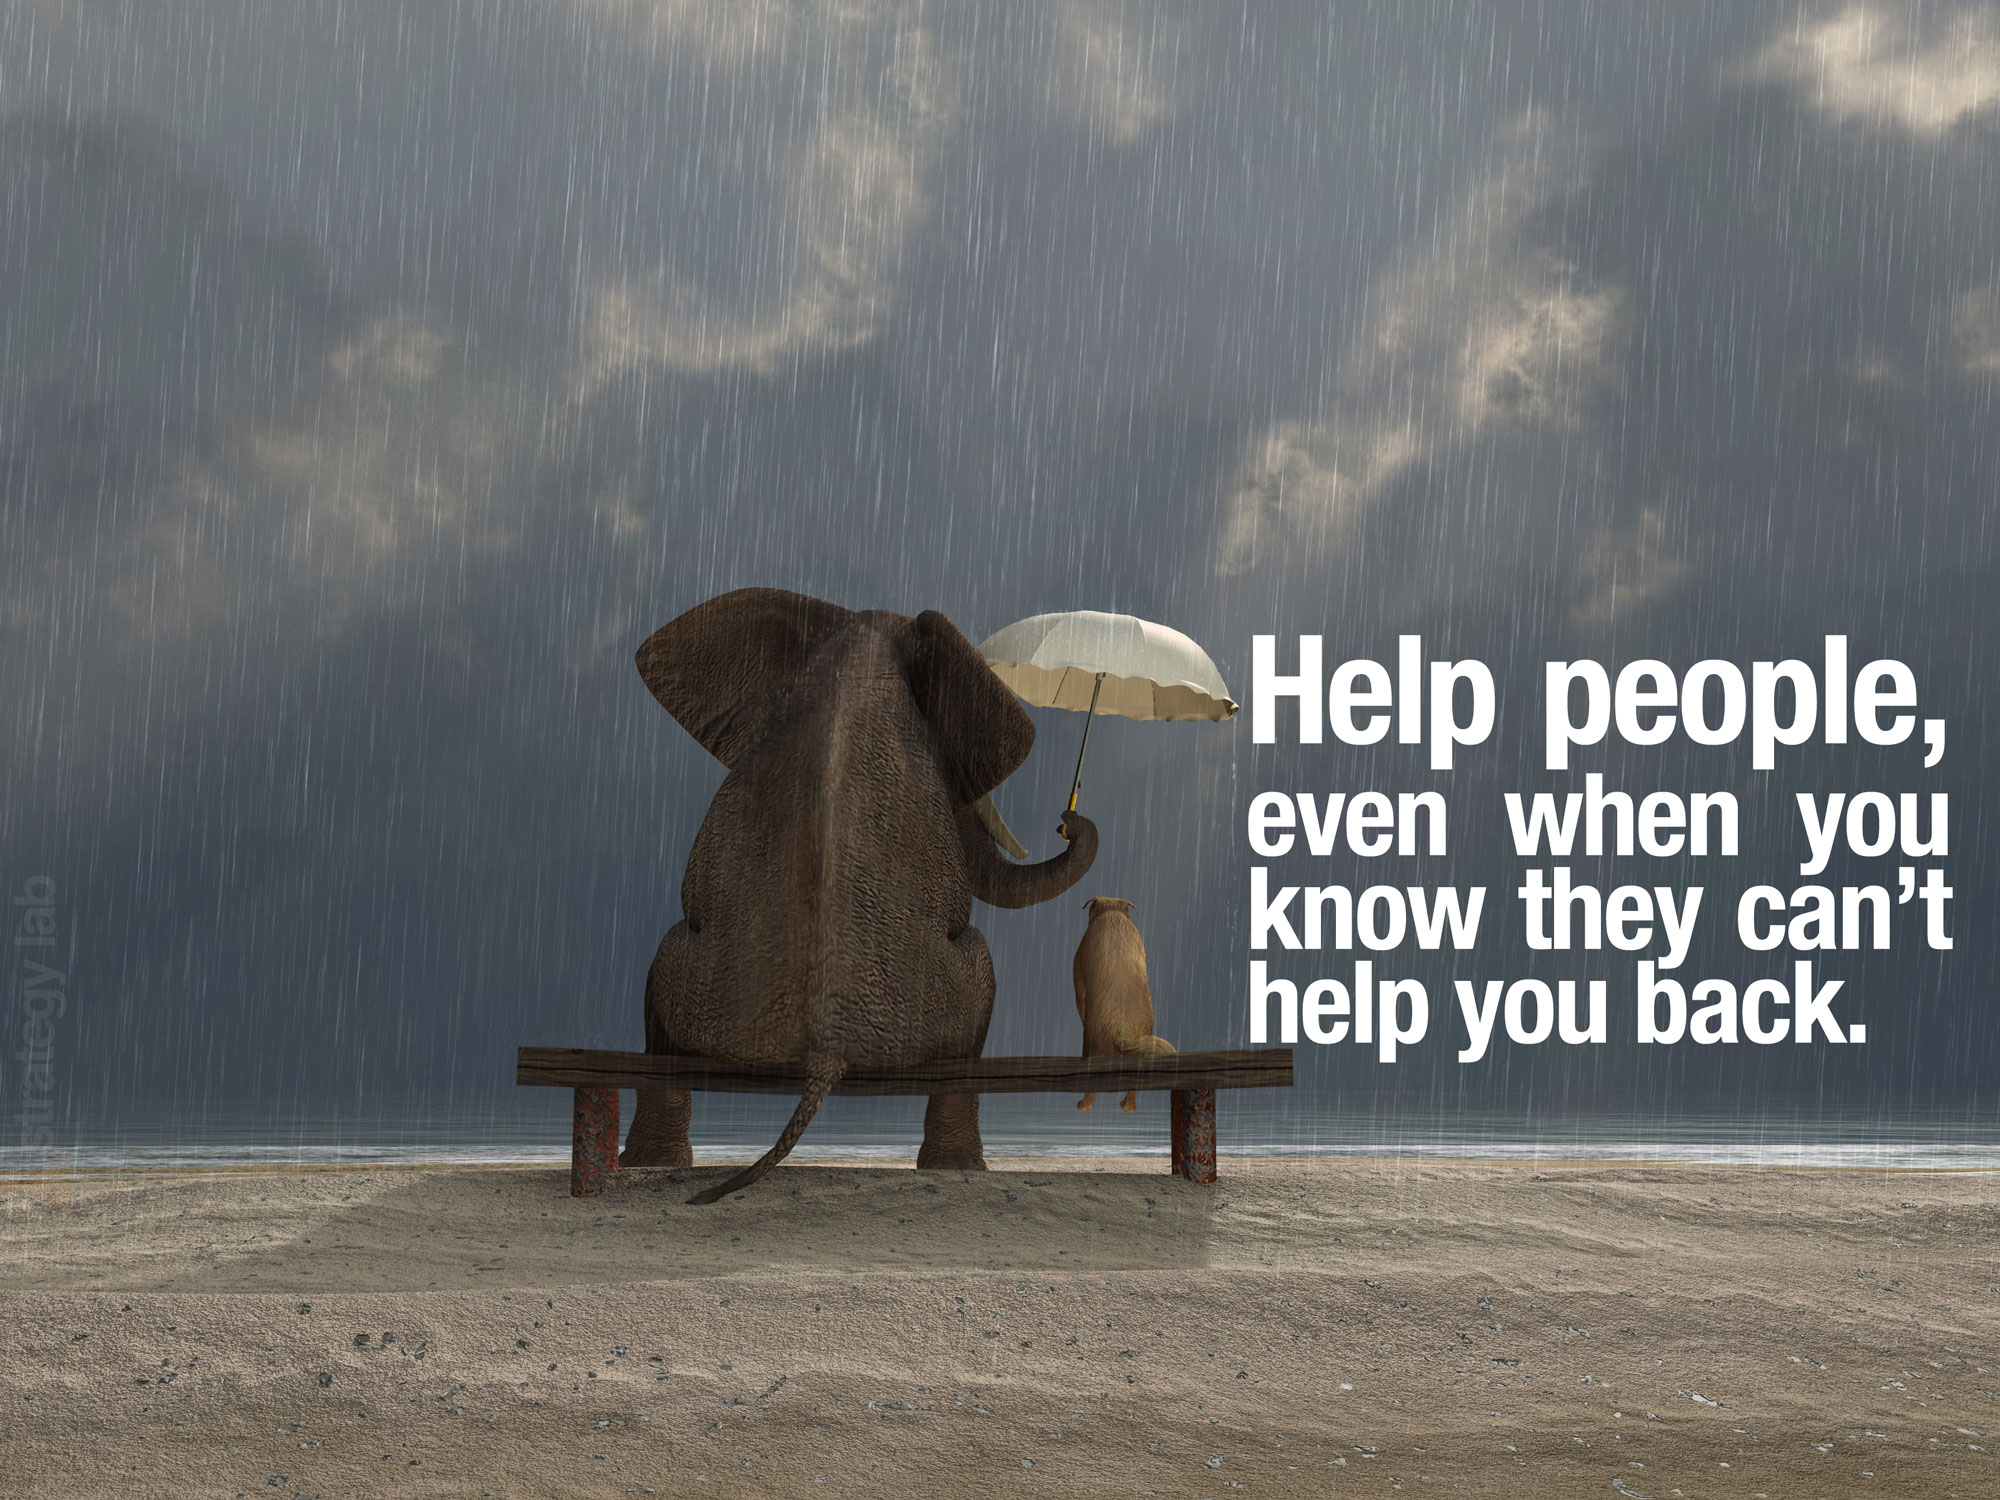 Help people even when you know they can't help you back